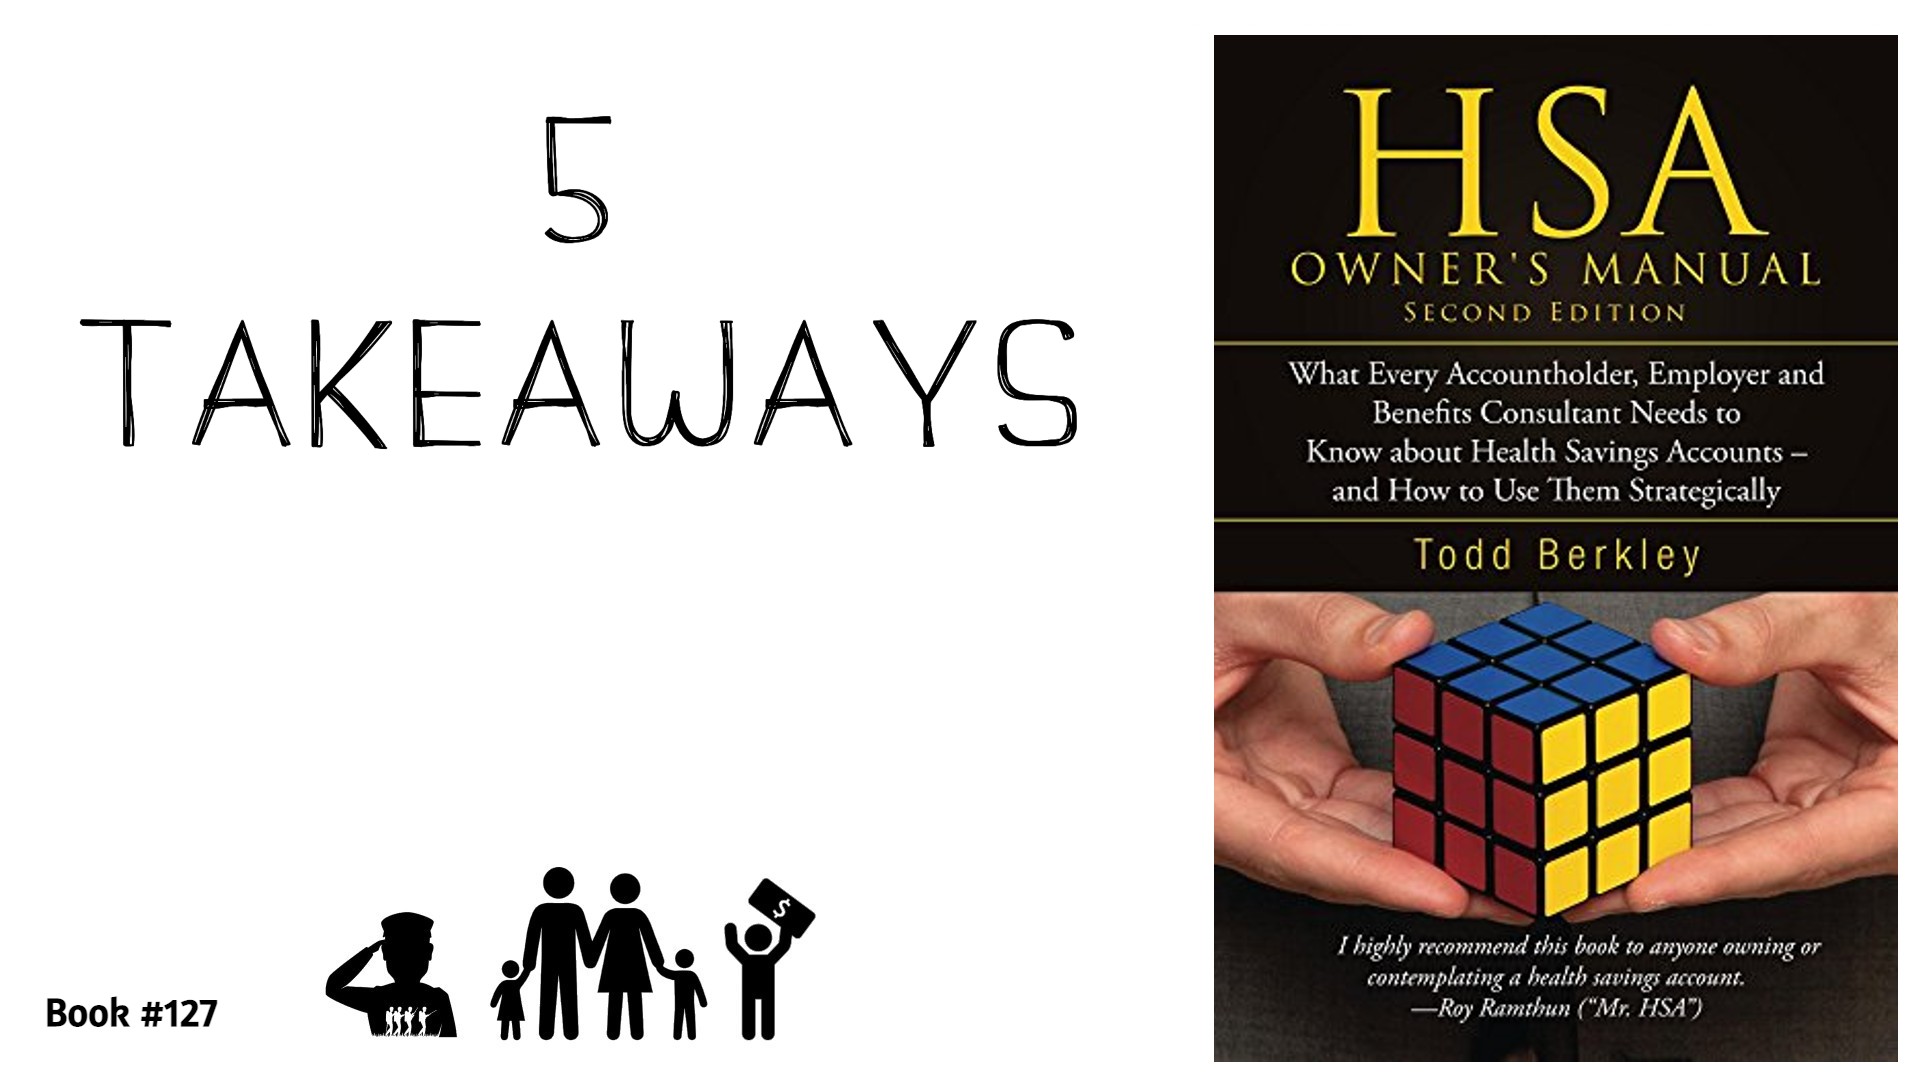 5 Takeaways from “HSA Owner’s Manual”